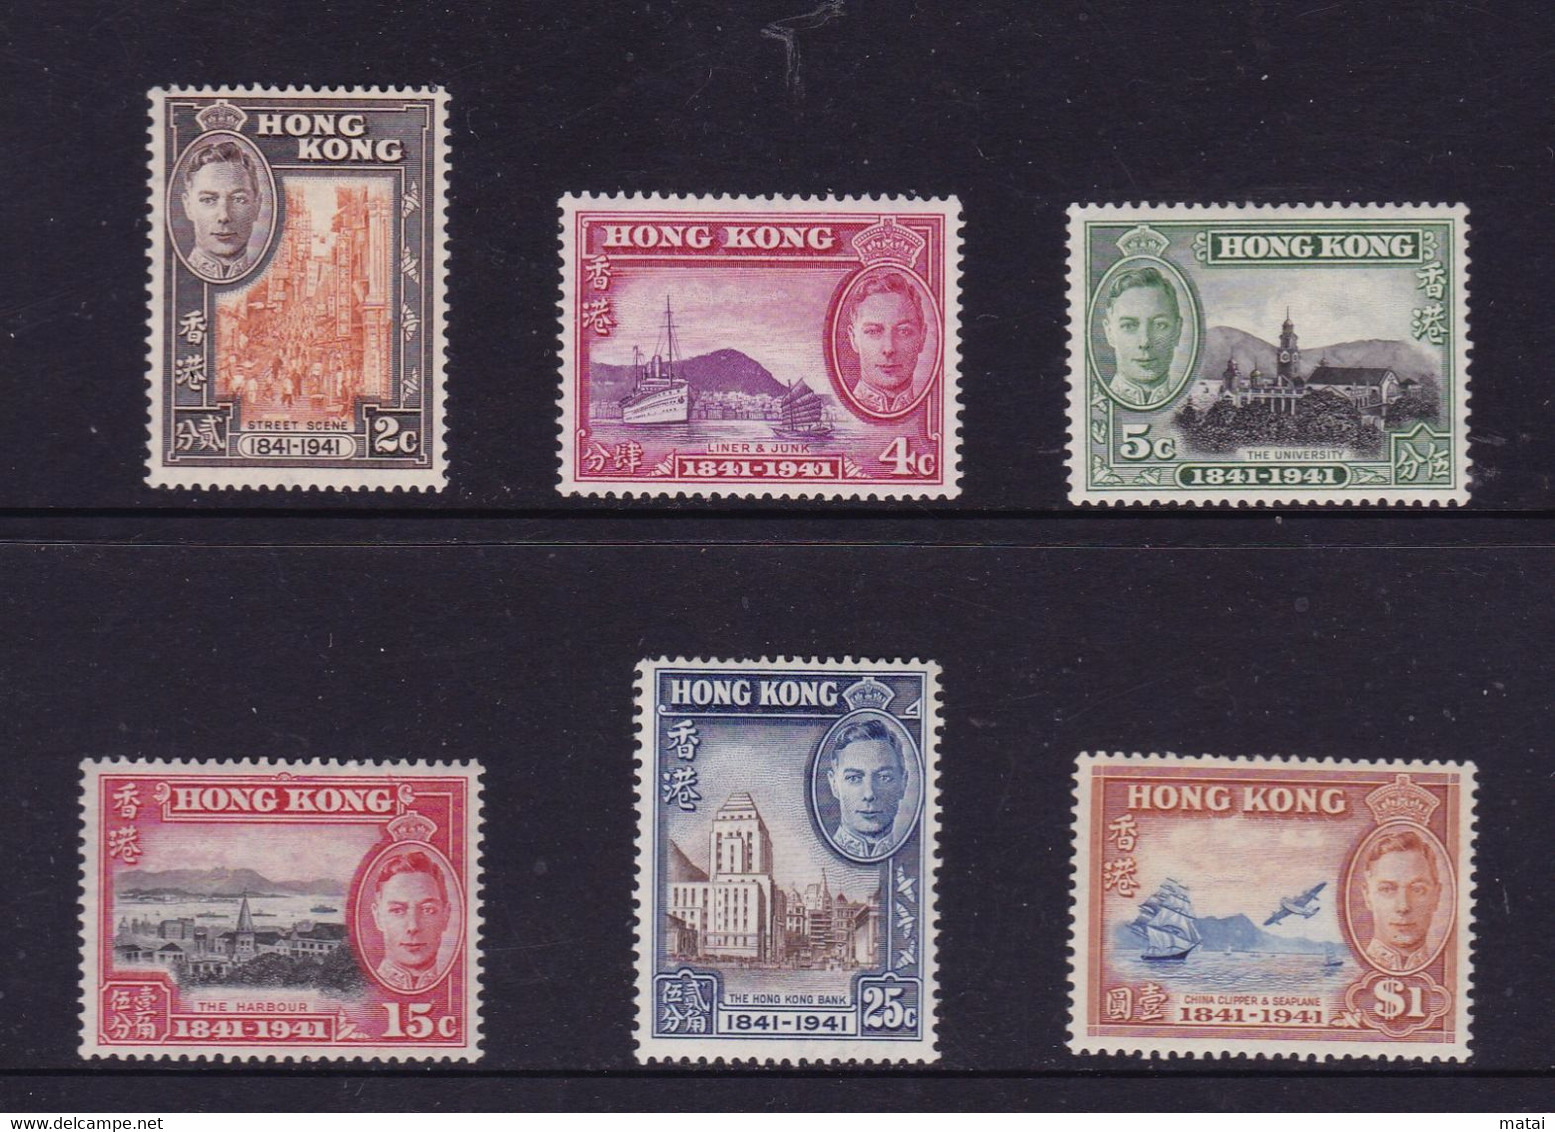 HONG KONG 1941, "Centenary Of British Occupation", Serie Mint, Trace Of Hinge - 1941-45 Ocupacion Japonesa